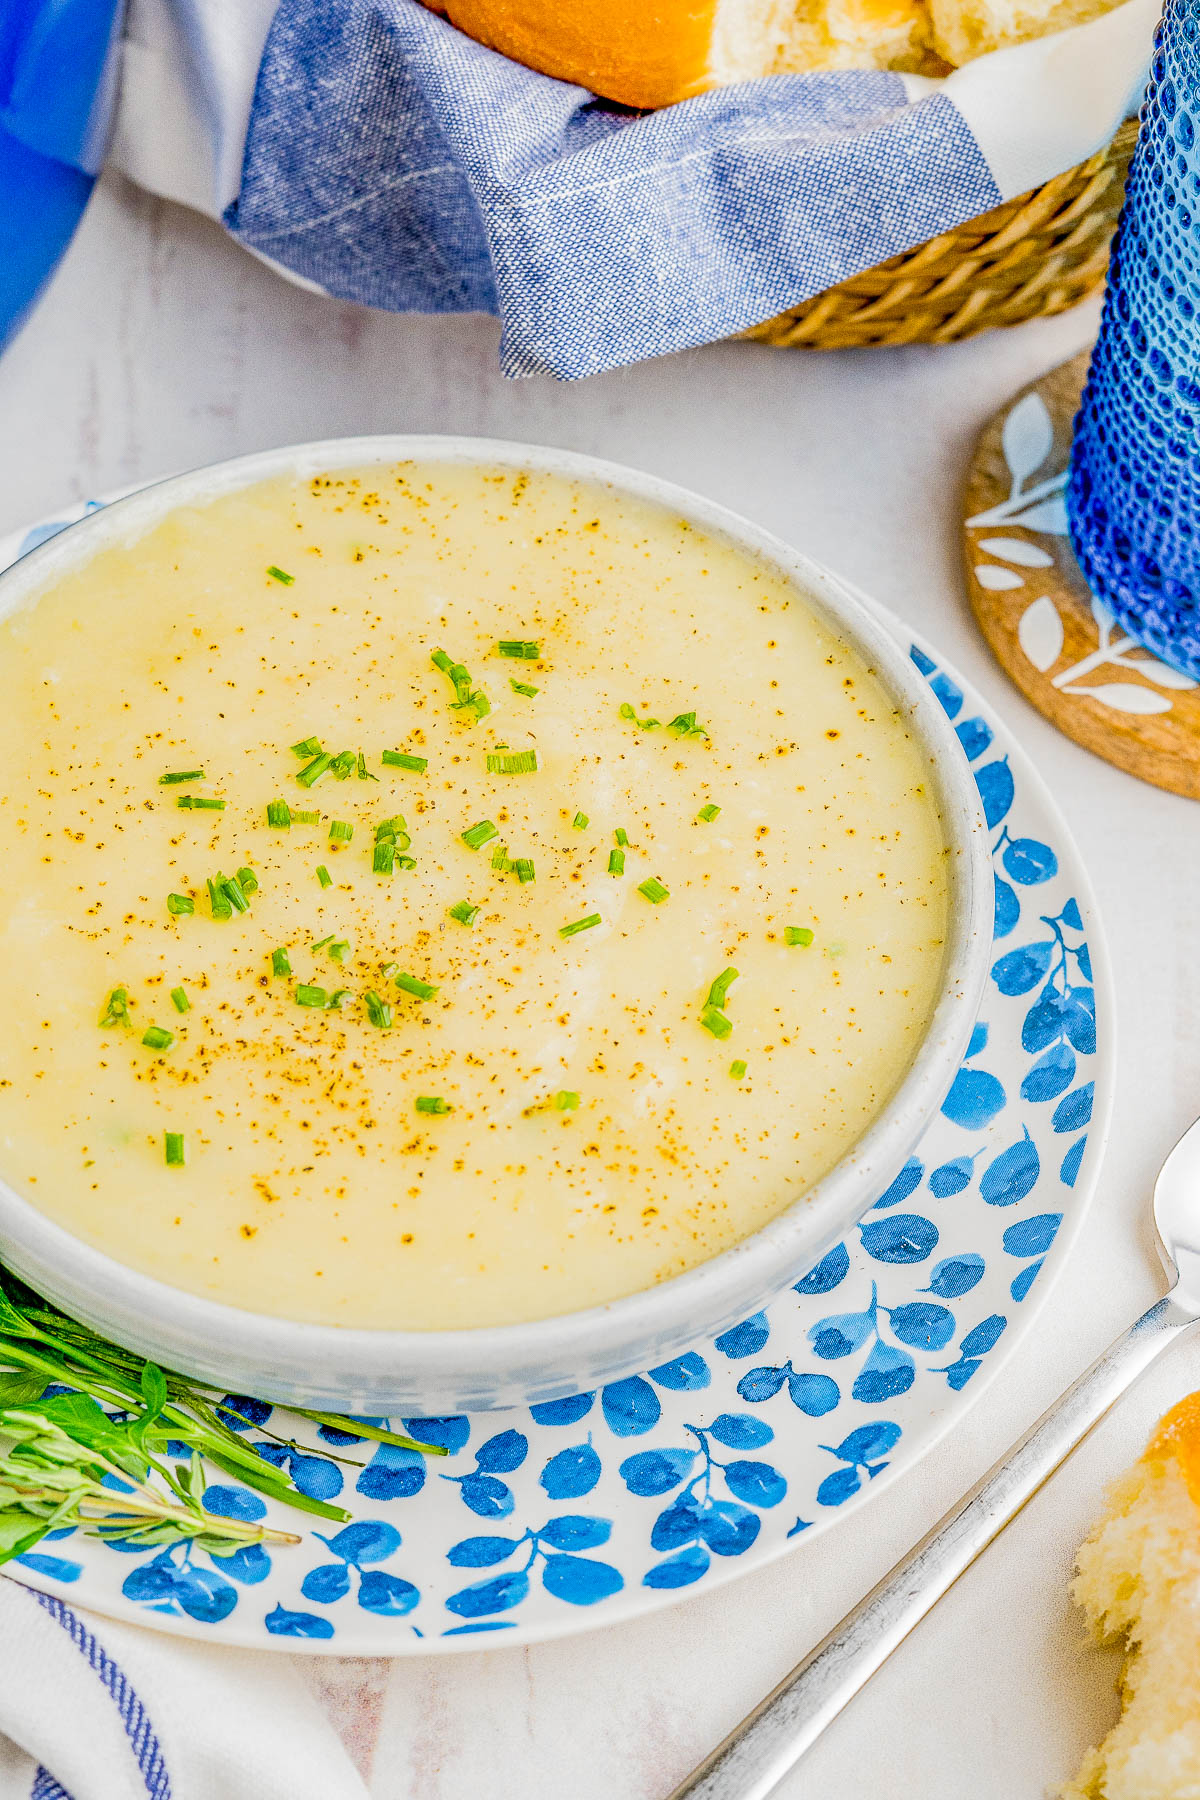 Easy Potato Leek Soup - Learn how to make this classic soup recipe that's ready in 30 minutes! Made in one pot with simple ingredients. A hearty comfort food soup that's just creamy enough without being too heavy. A crowd-favorite recipe for the BEST and EASIEST potato leek soup! 